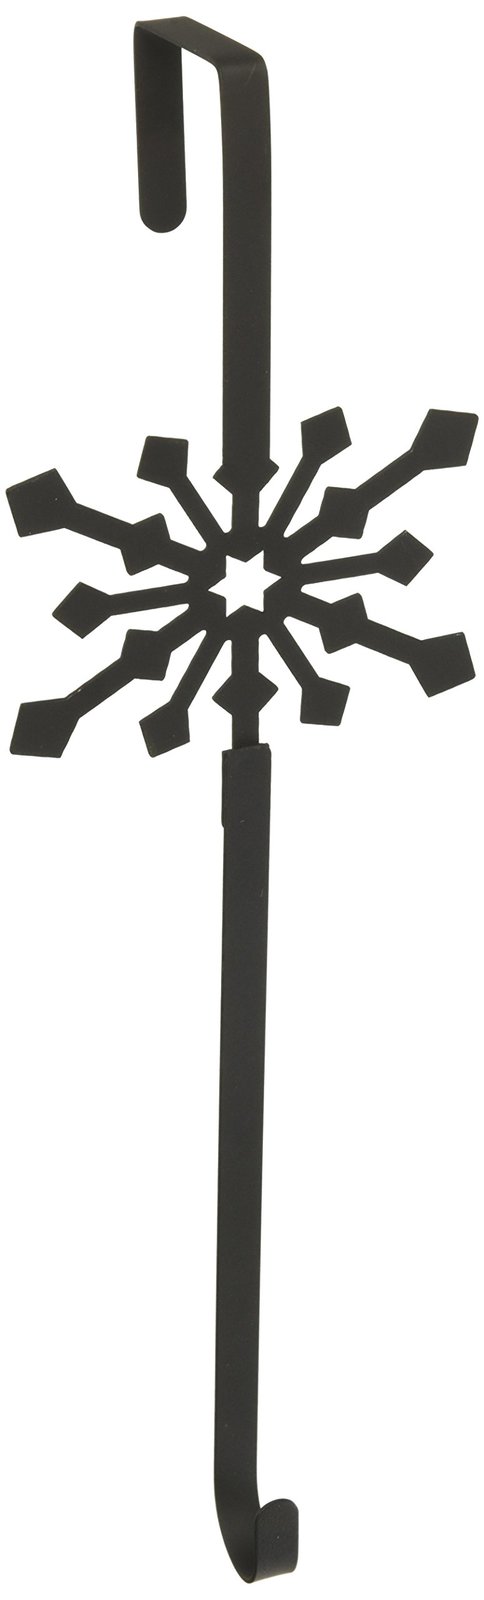 Primary image for 13 Inch Snowflake Wreath Hanger